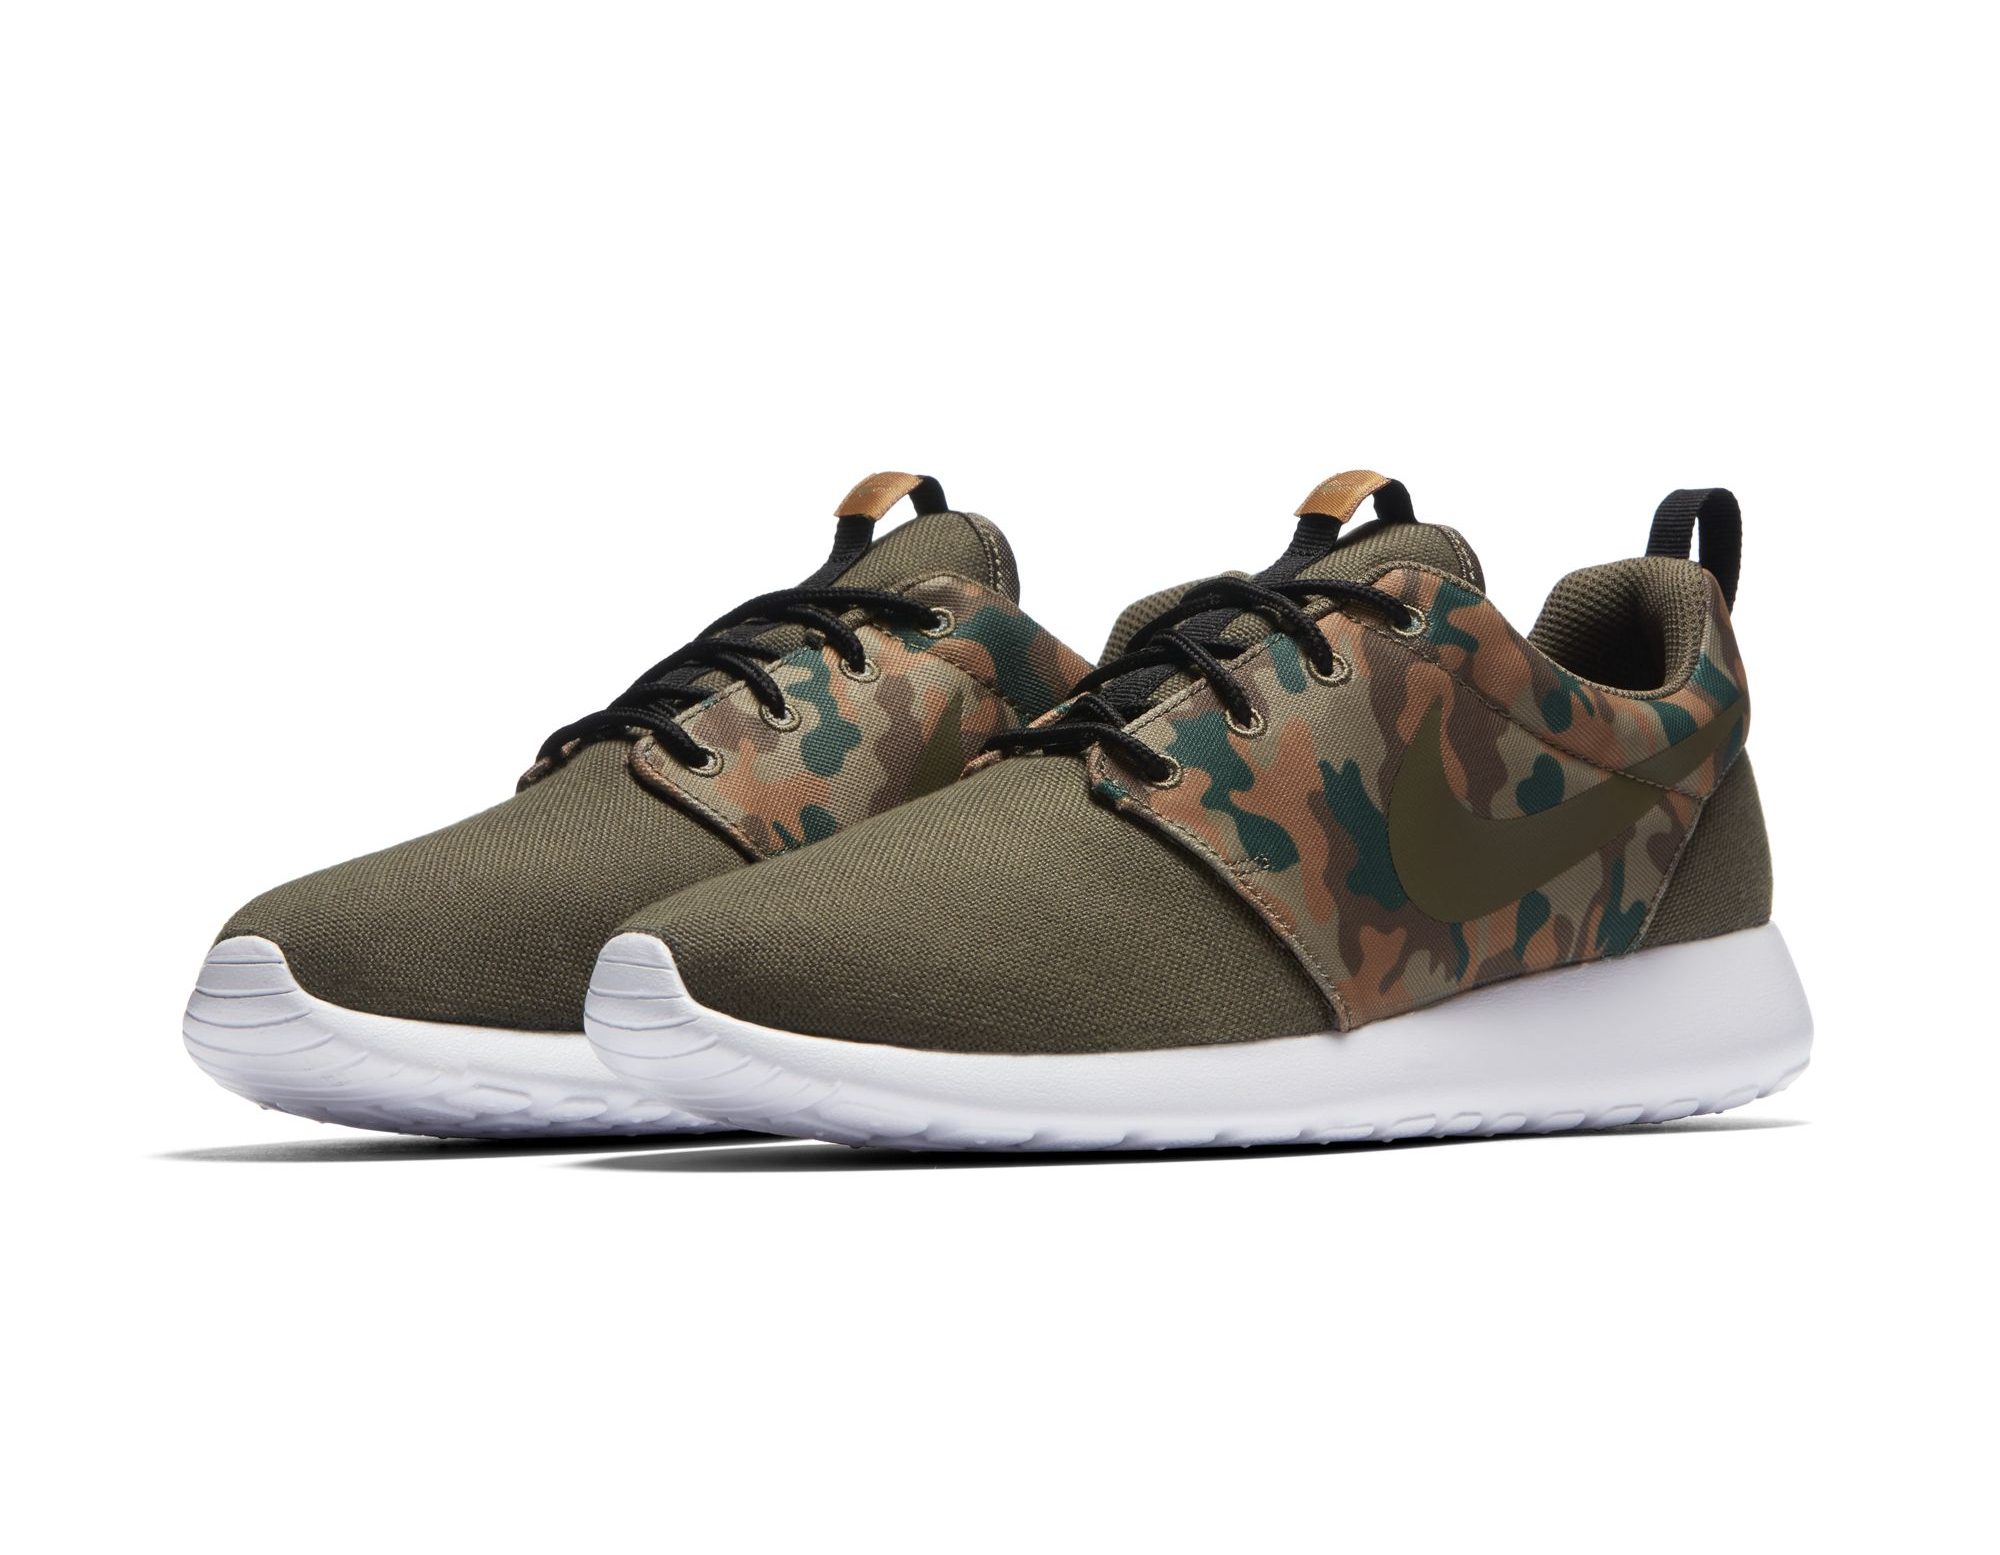 bout Darmen Emulatie The Latest Nike Roshe One SE Pack Uses Camo for Fall - WearTesters